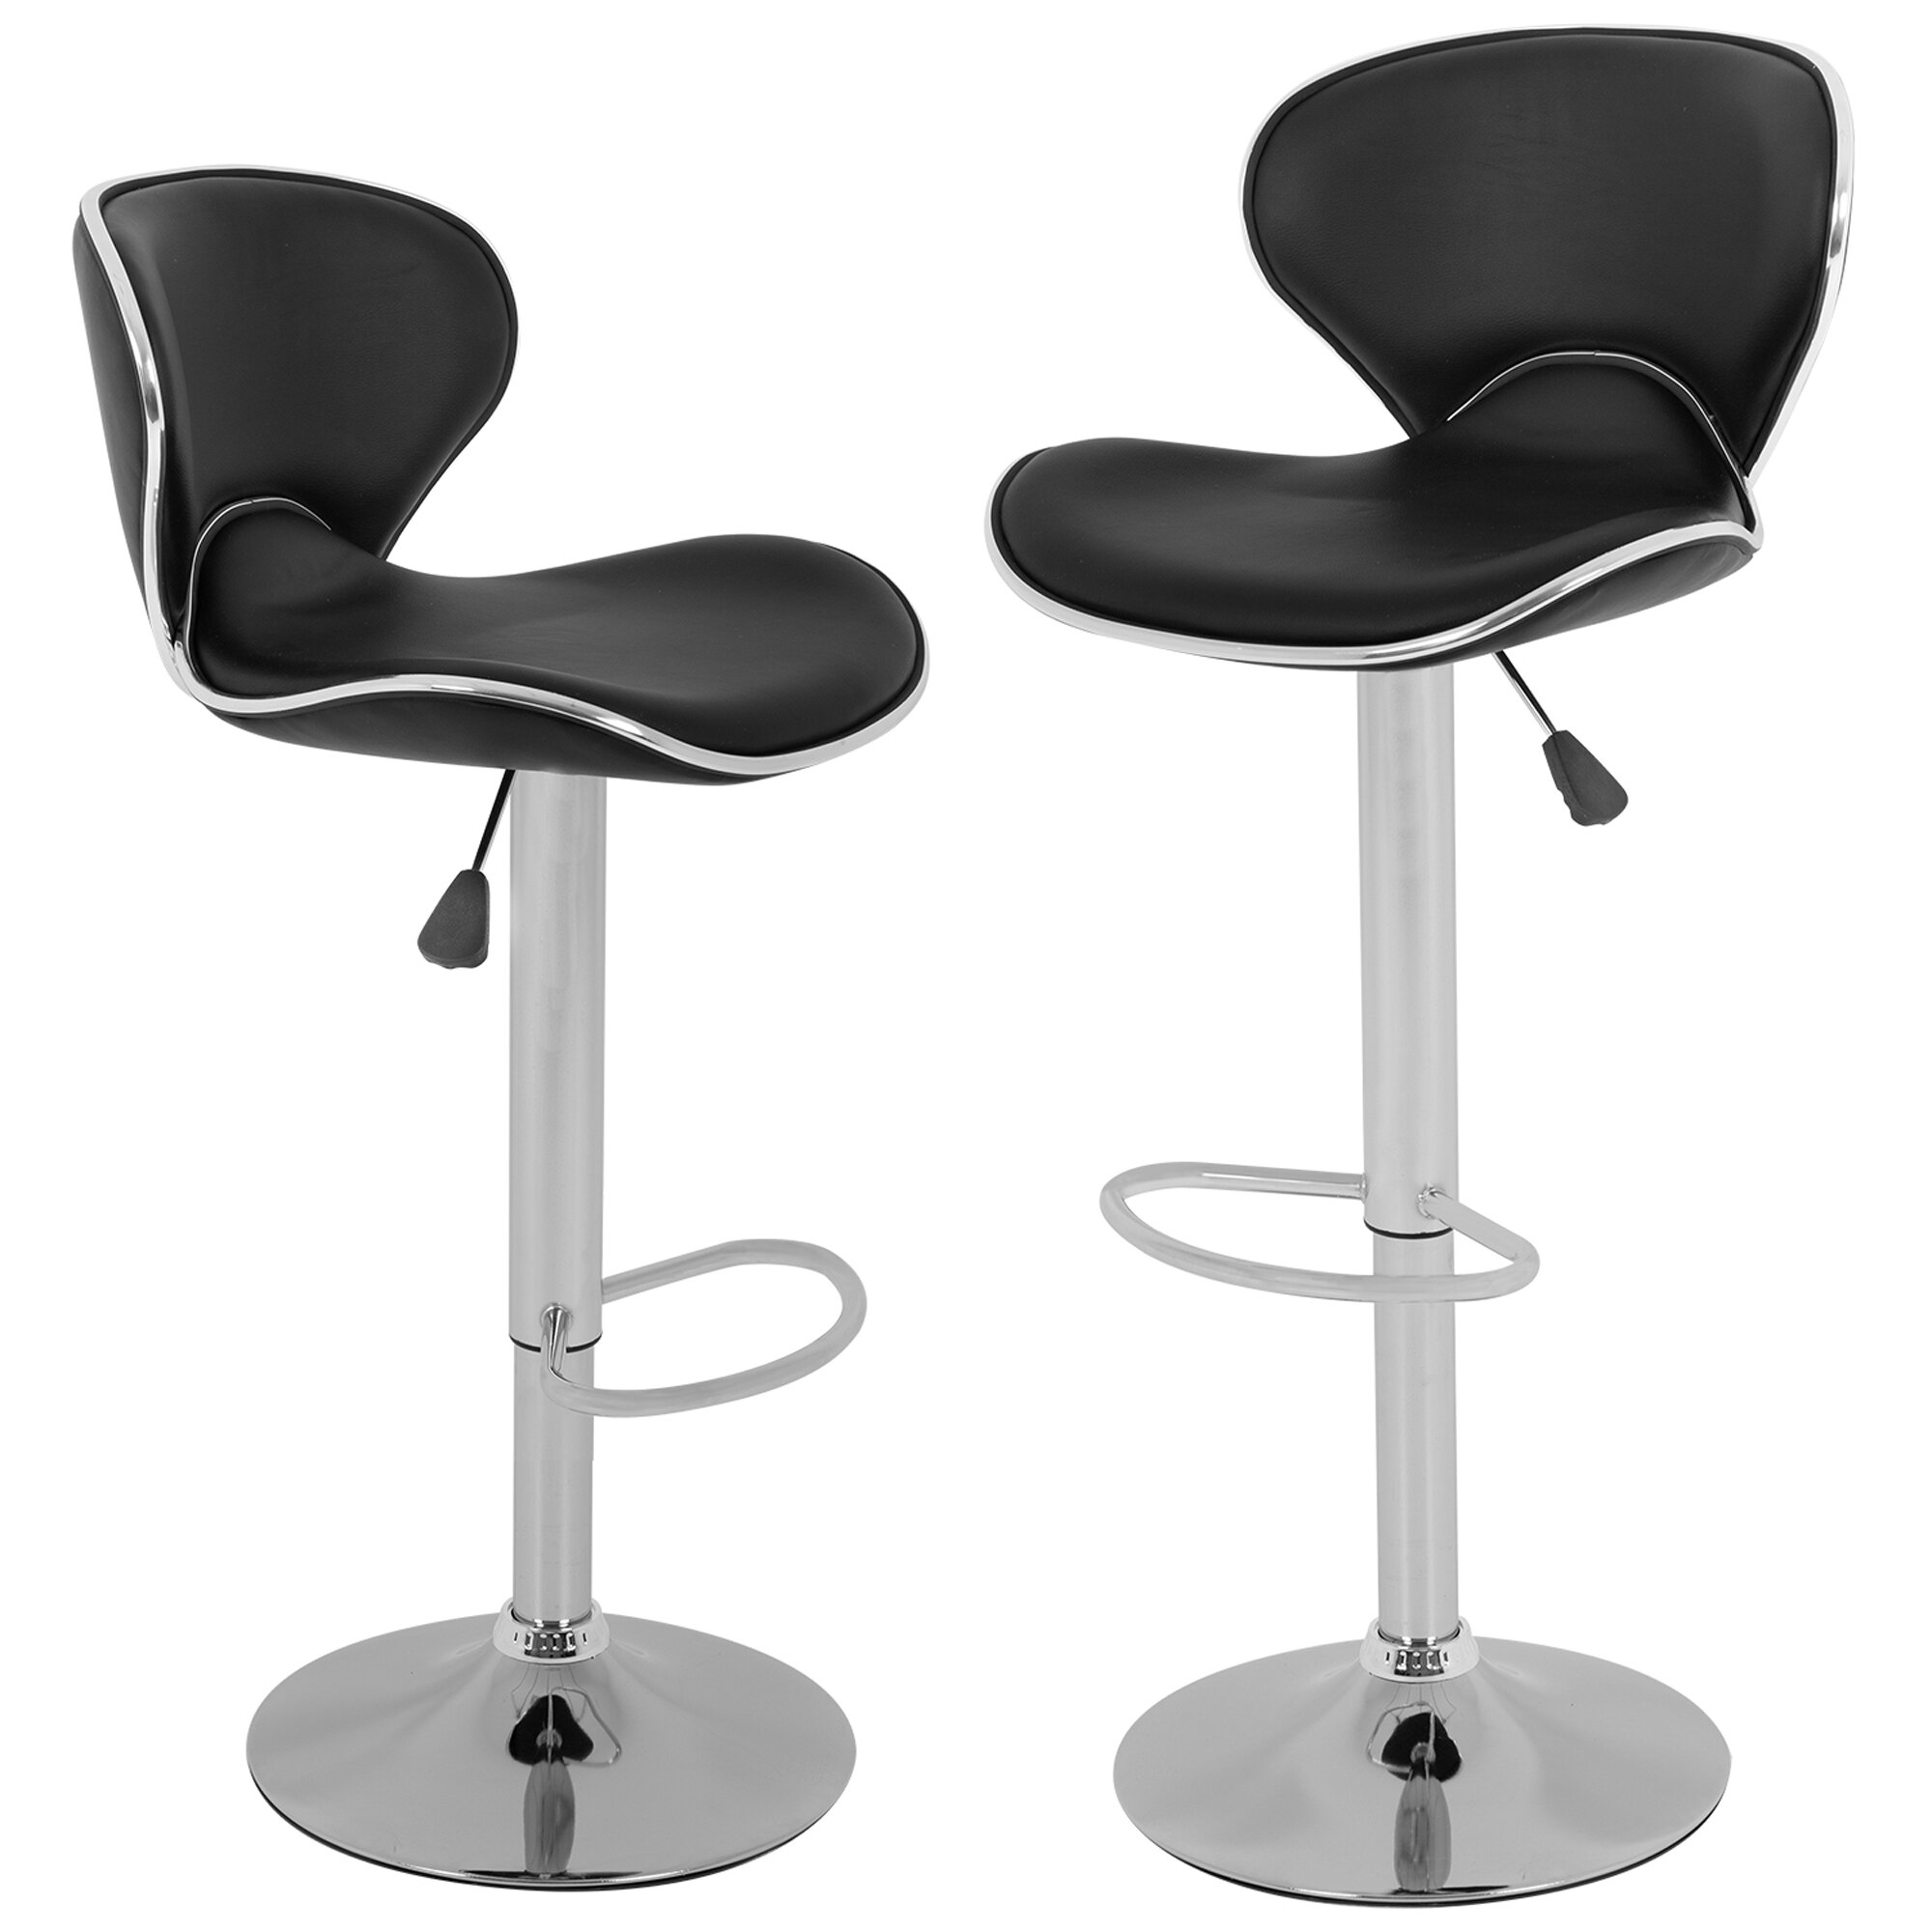 Set of 2 Bar Stools Adjustable Hydraulic Swivel Dining Counter Chair Pub Kitchen 